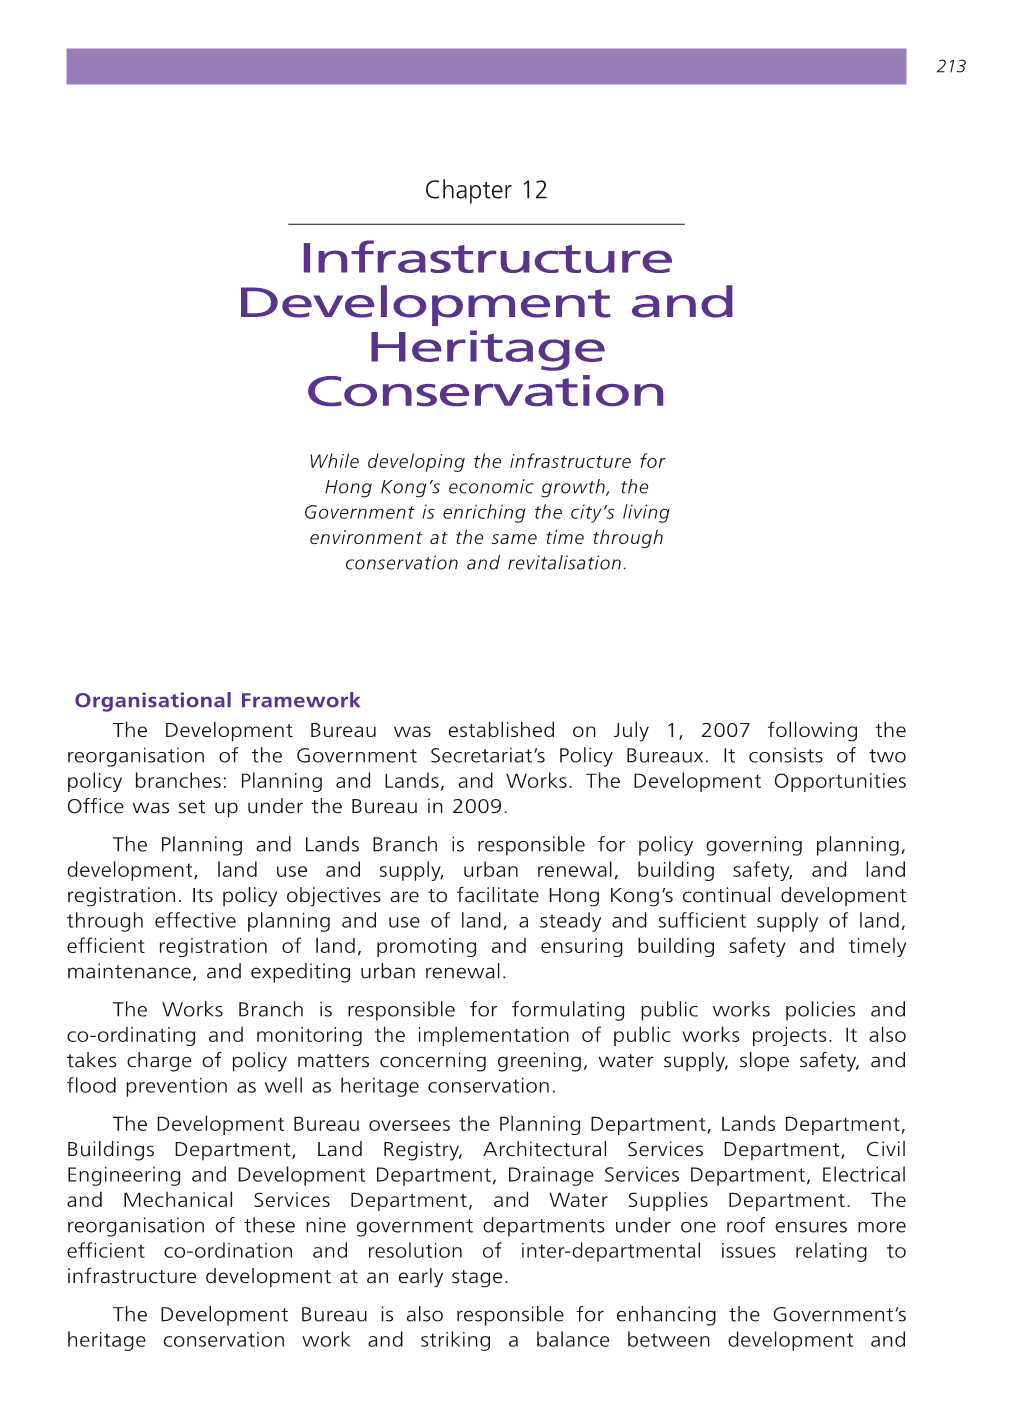 Infrastructure Development and Heritage Conservation